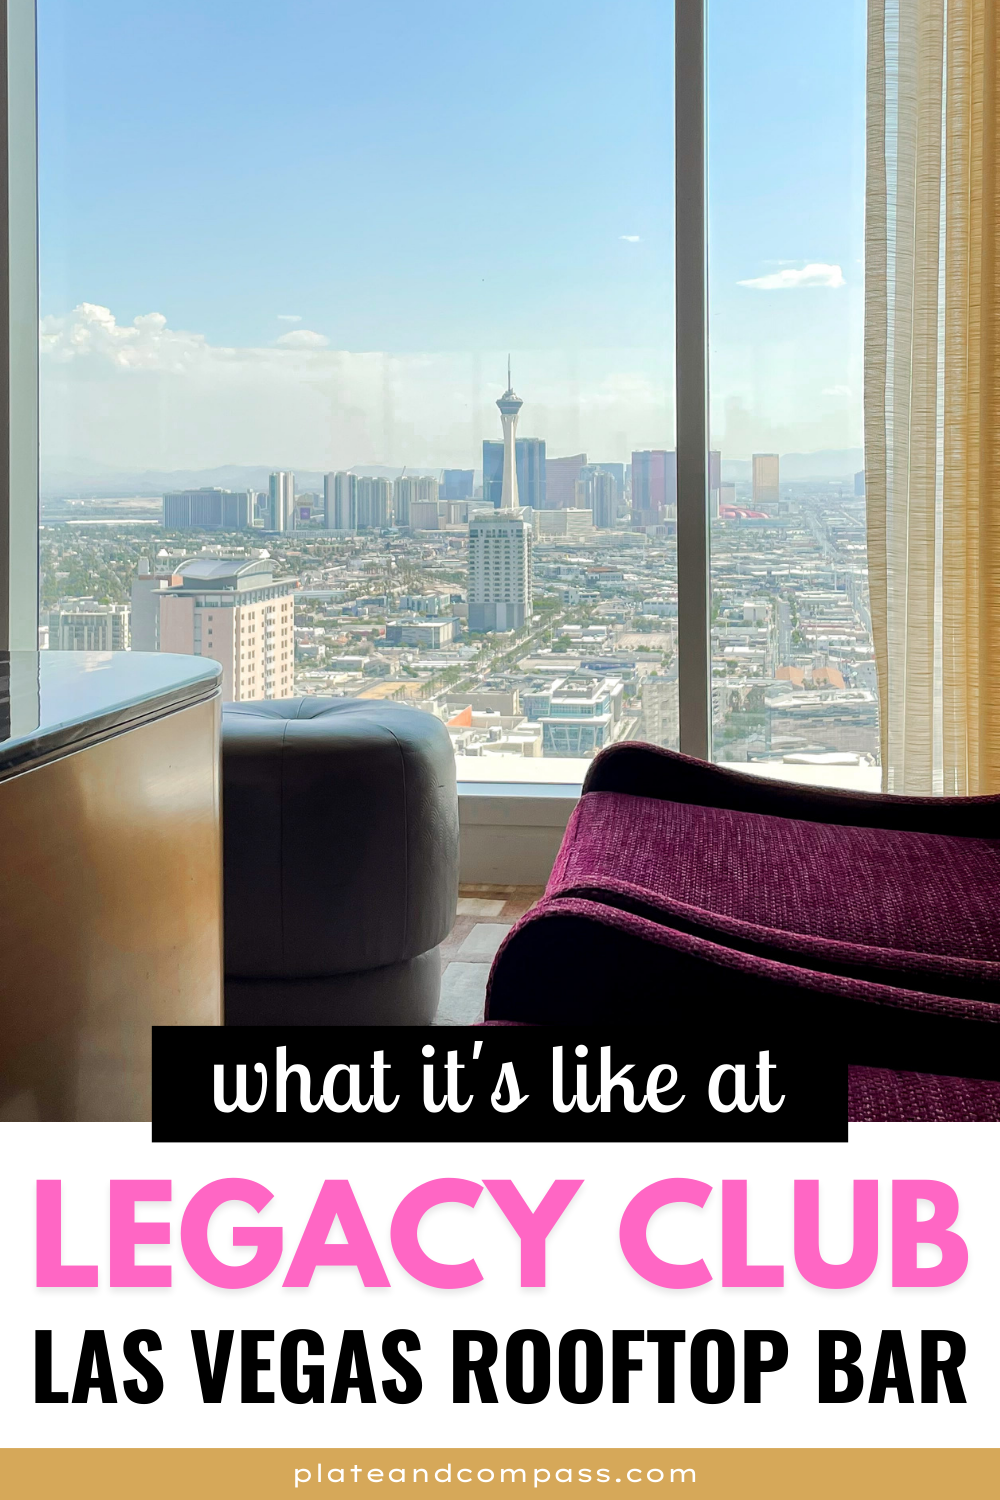 What it's like at Legacy Club Las Vegas Rooftop Bar